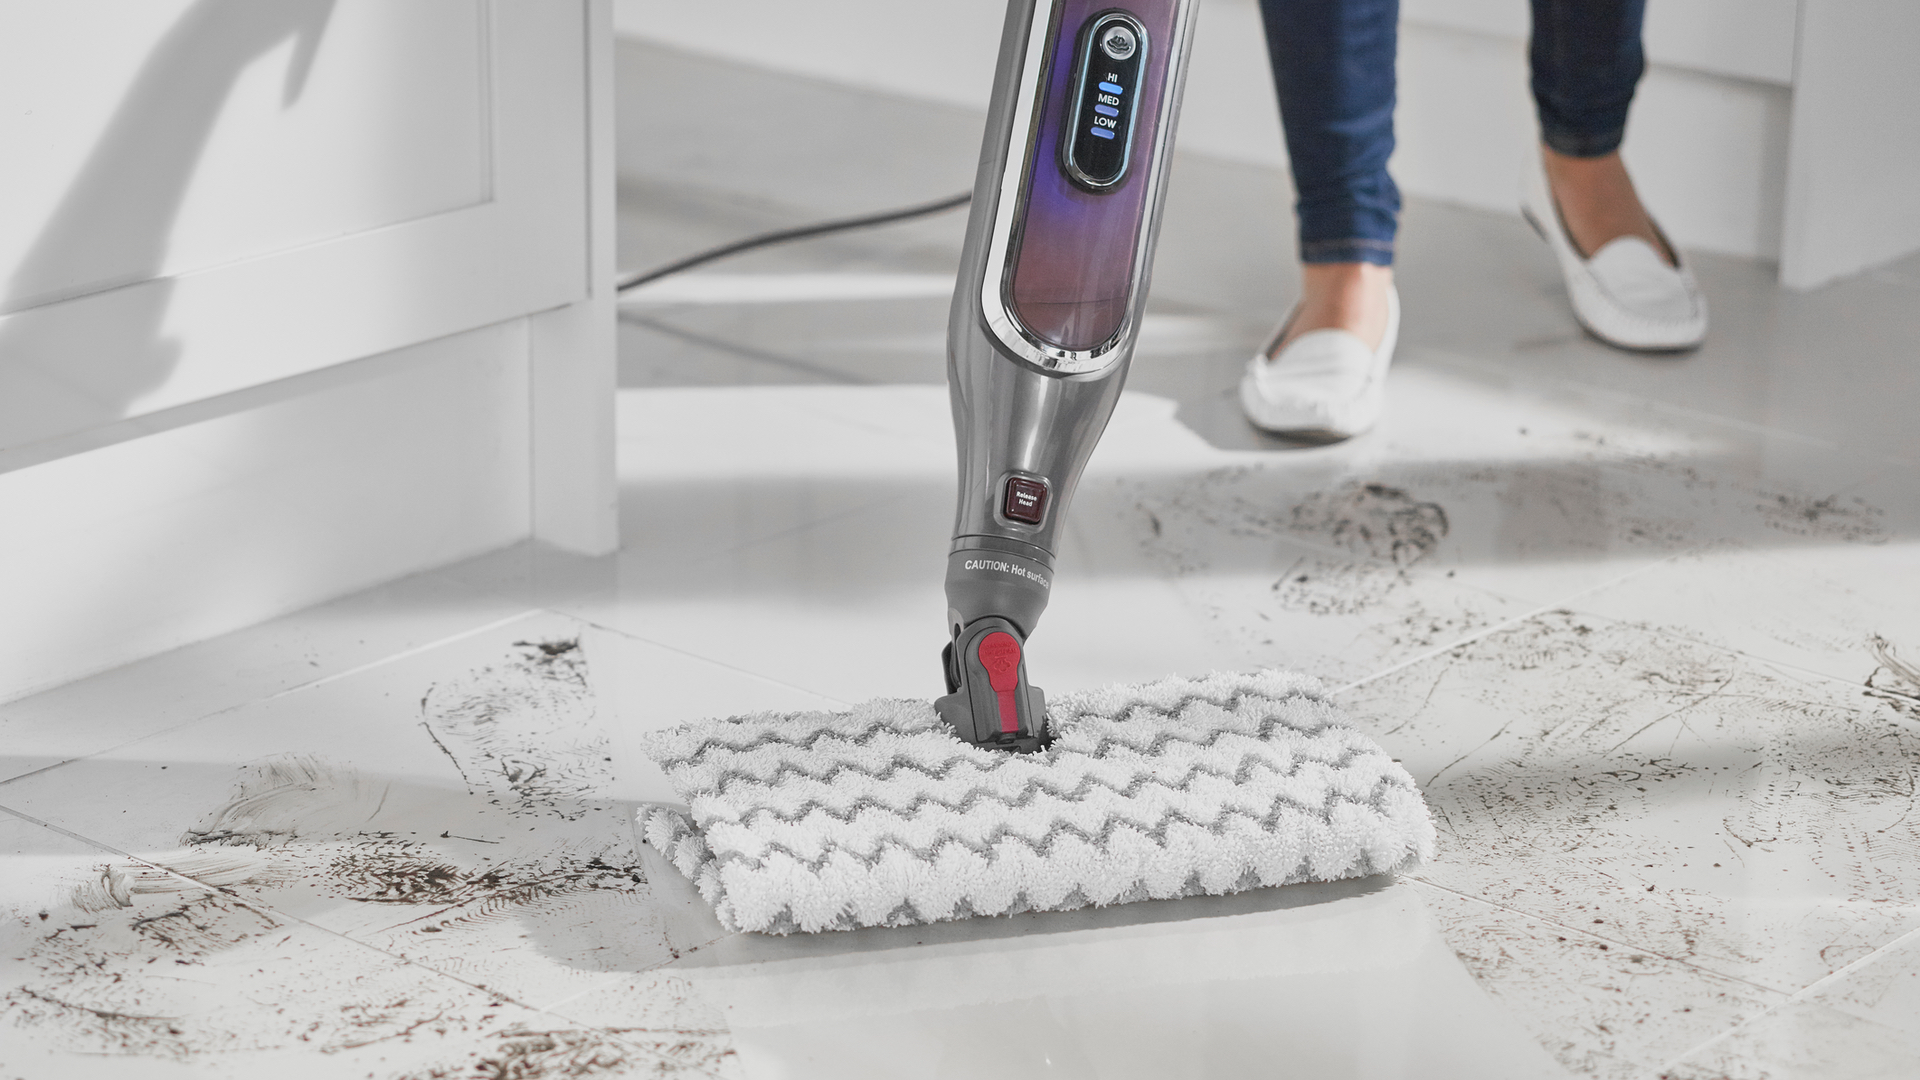 Tech review: Kärcher SC 3 Upright EasyFix Steam Cleaner functional but  clumsy